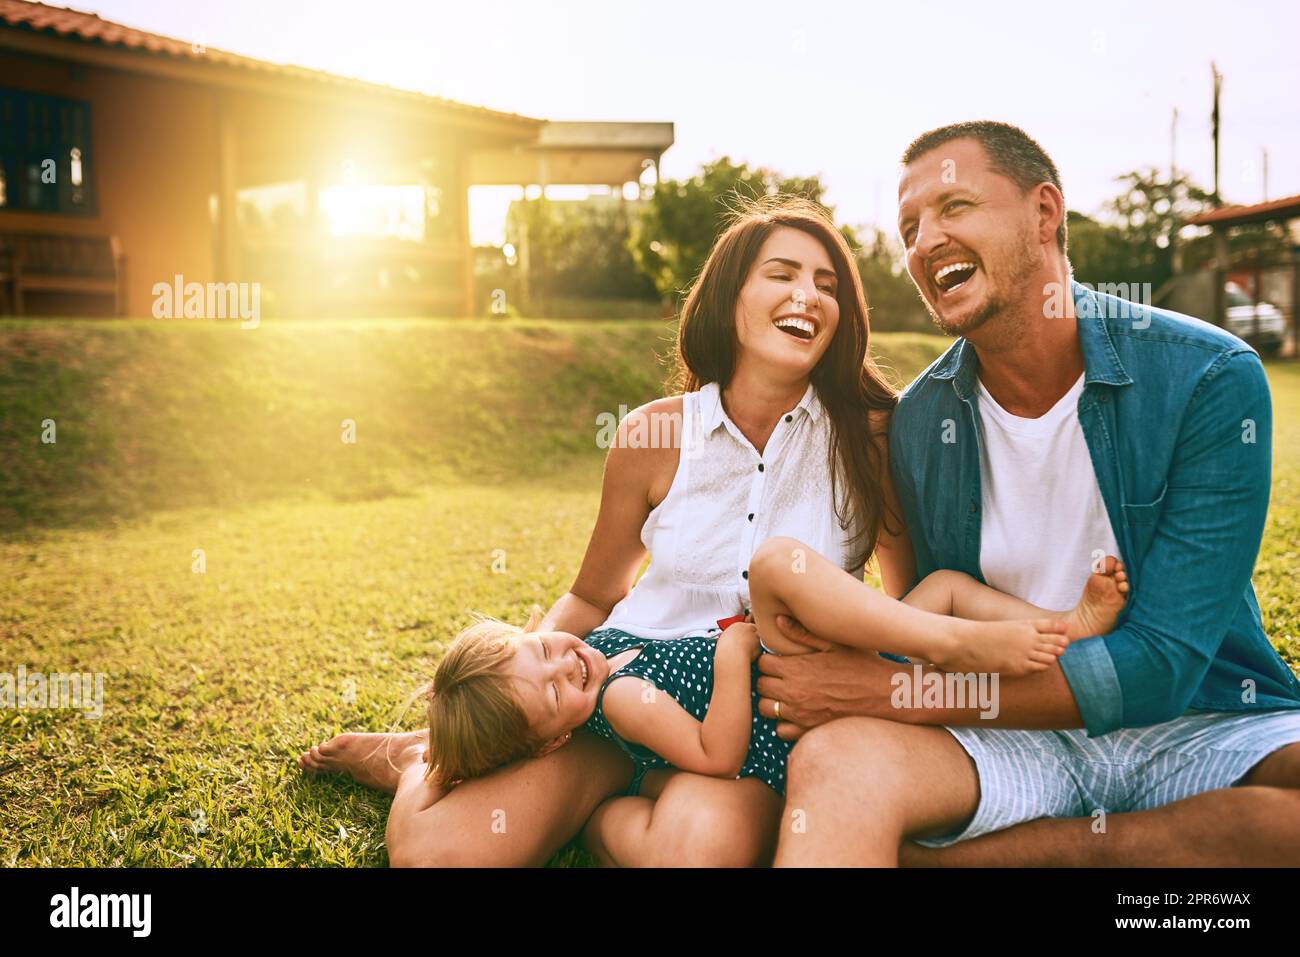 Their family is all about the love. Cropped shot of a young family spending time together outdoors. Stock Photo